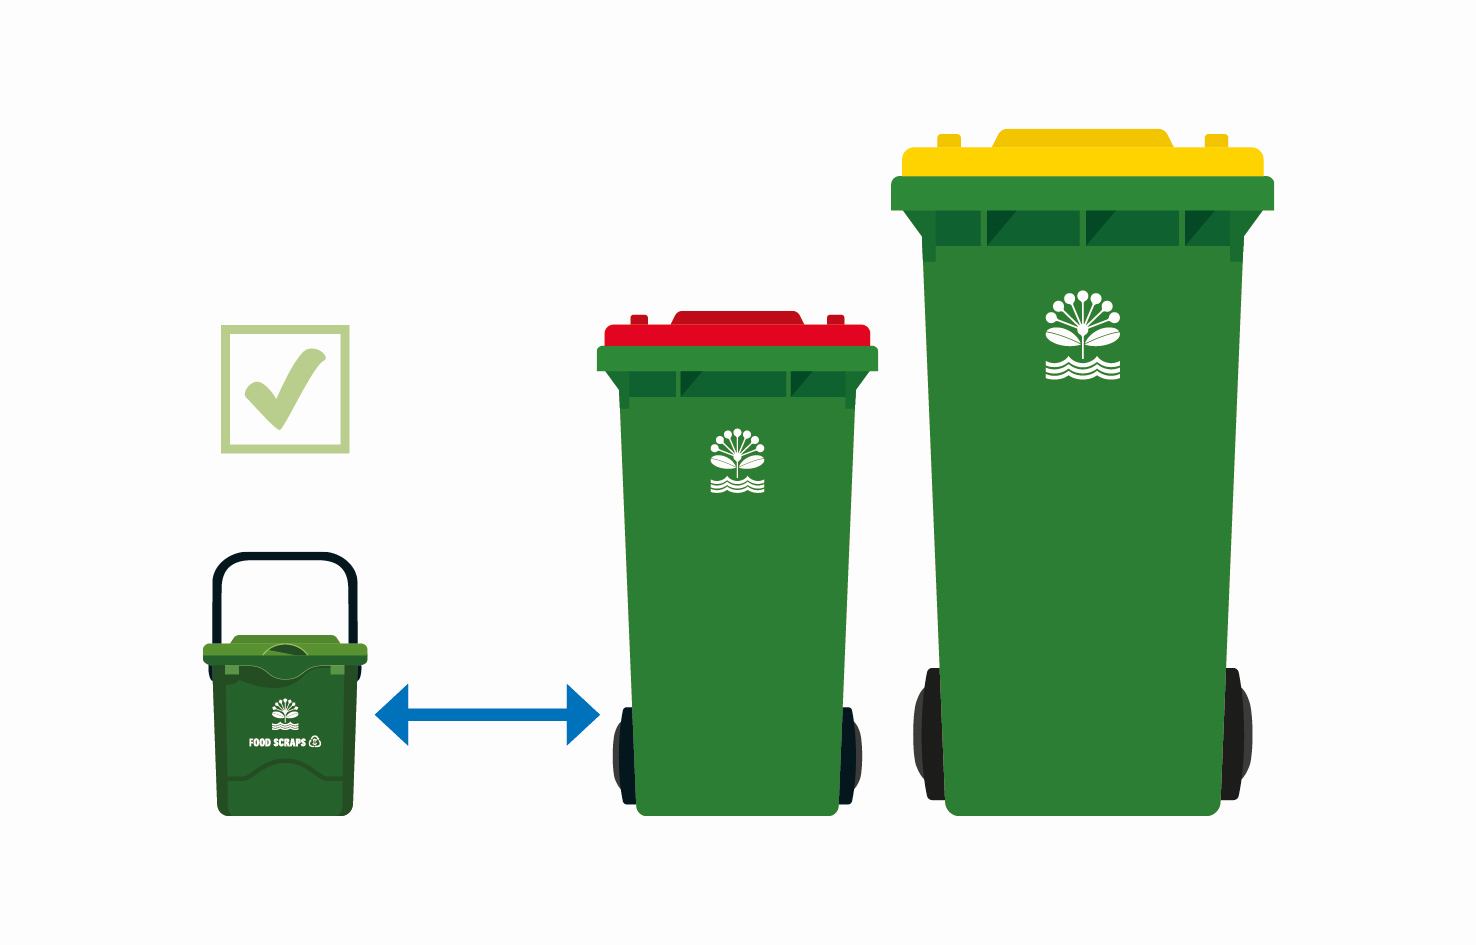 Infographic showing correct way to place bins roadside on council rubbish day.